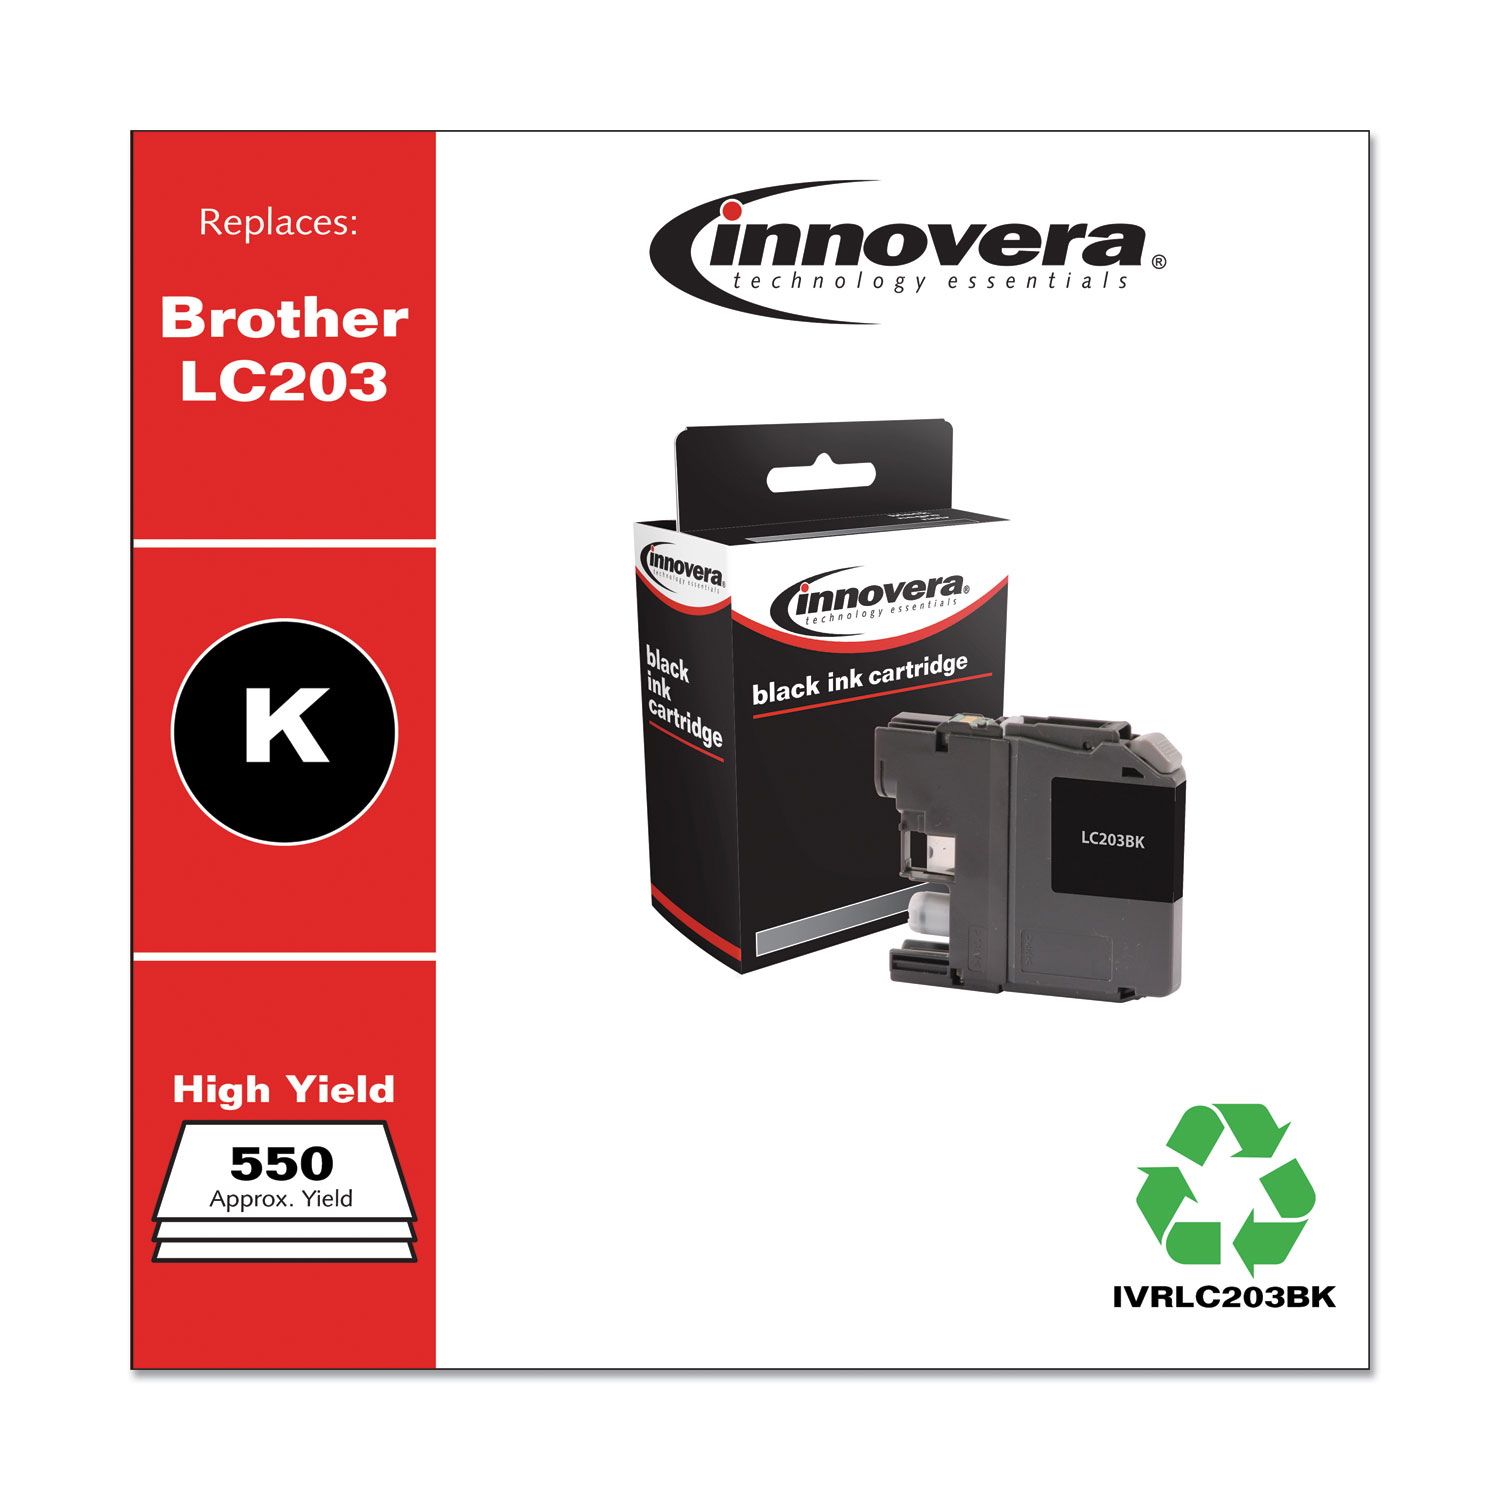  Innovera IVRLC203BK Remanufactured Black High-Yield Ink, Replacement for LC203BK, 550 Page-Yield (IVRLC203BK) 